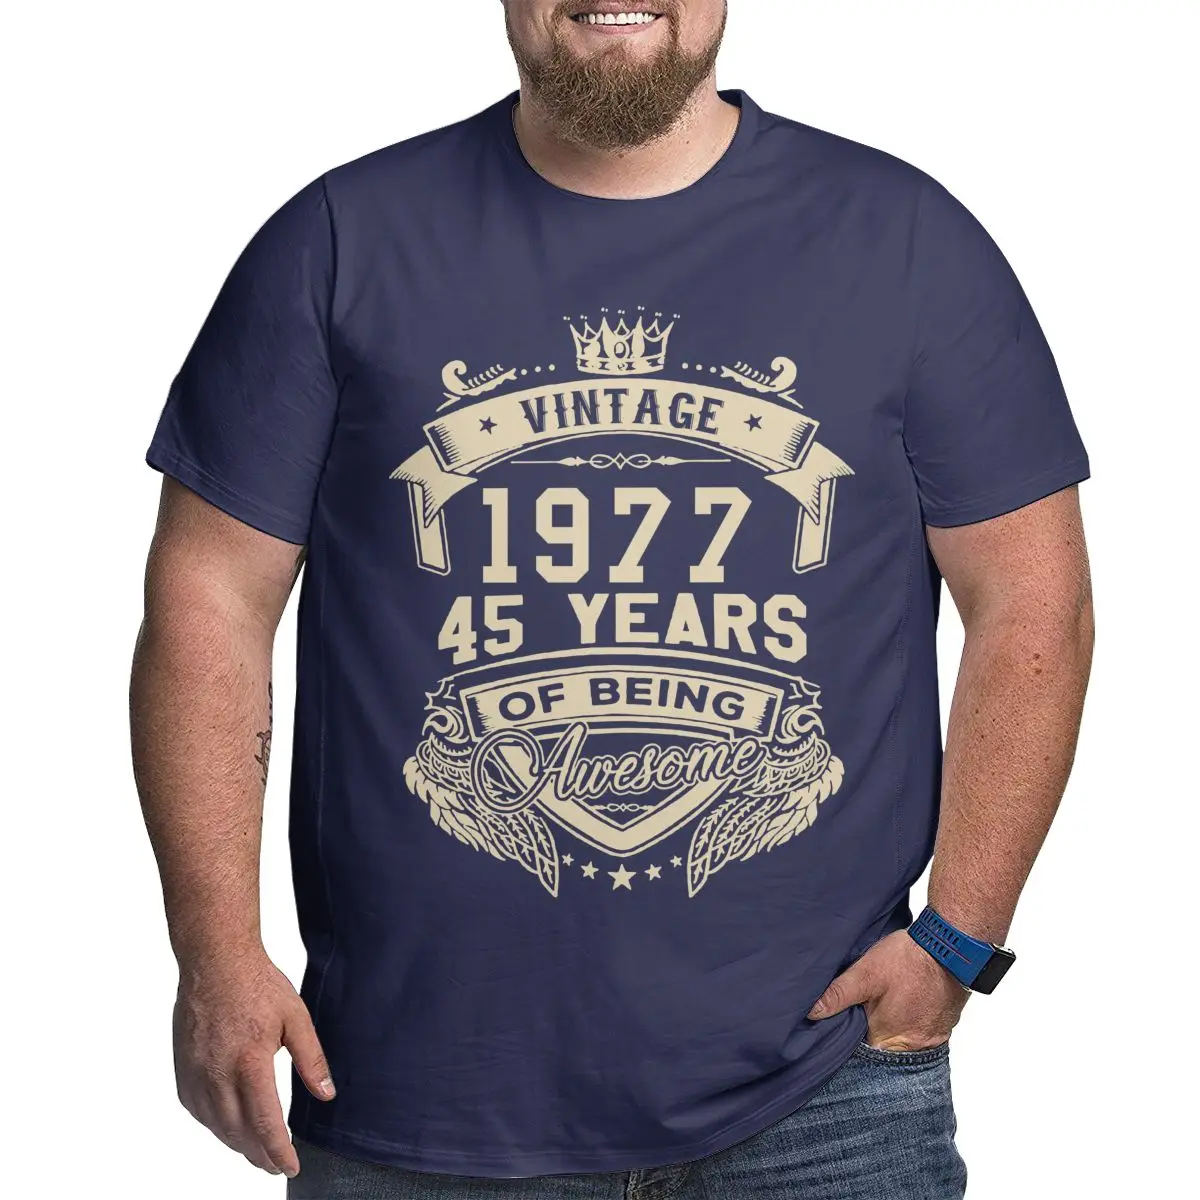 

Vintage Born In 1977 45 Years Of Being Awesome Birthday Gift T Shirt for Men 100% Cotton Big Tall Oversized 4XL 5XL 6XL Clothes